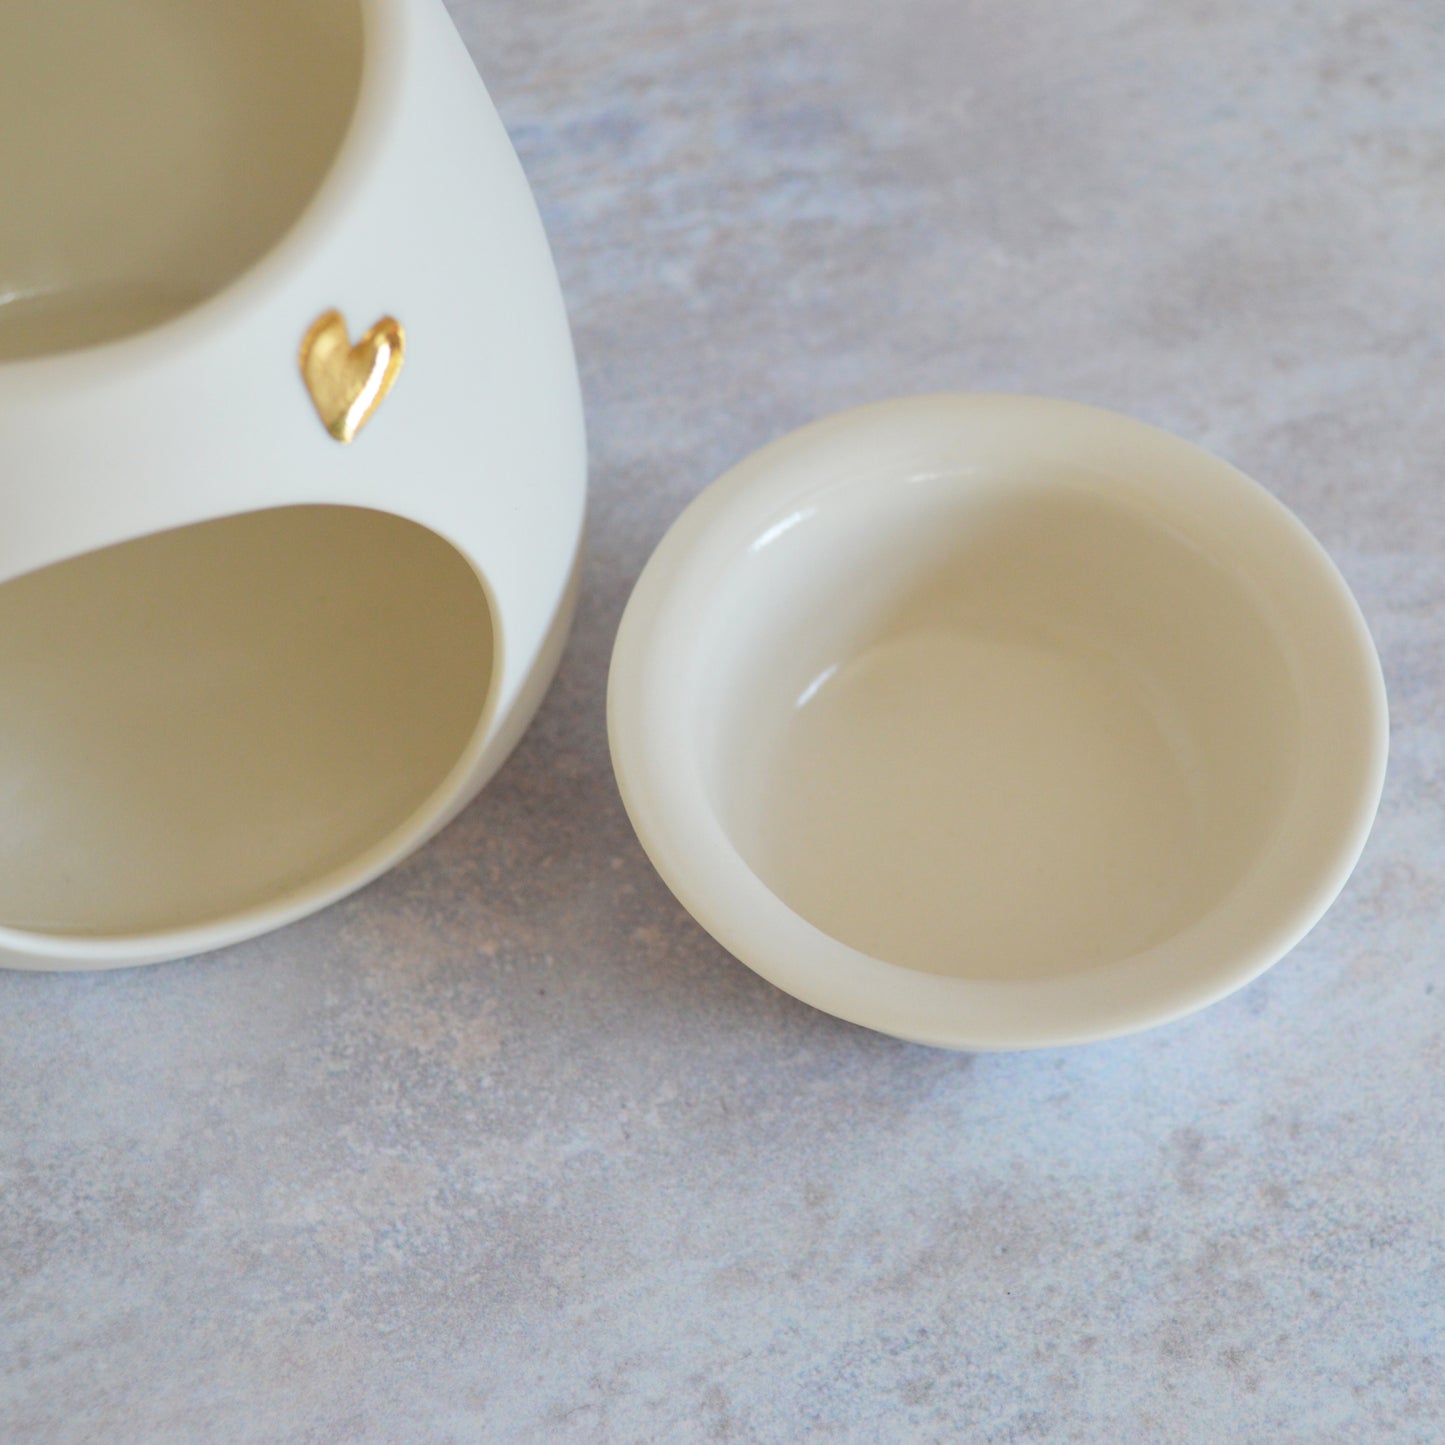 Wax And Oil Burner With A Gold Embossed Heart And Detachable Lid | Wax Burner | Porcelain